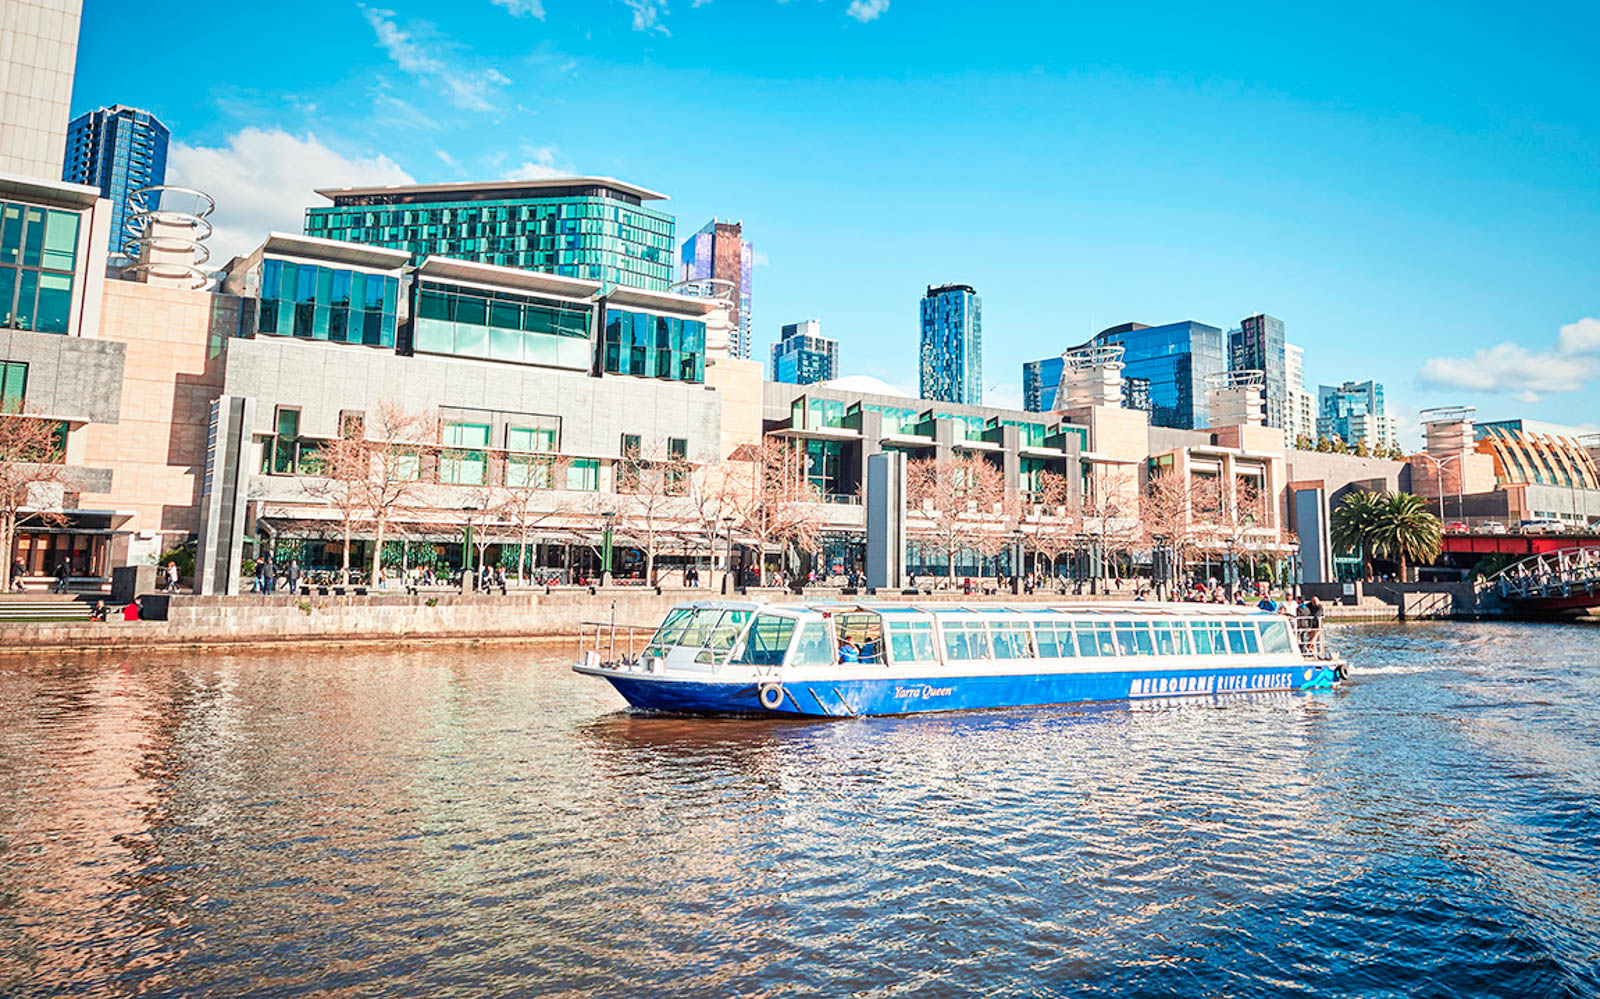 Image of 1 or 2-Hour Sightseeing Cruise on Yarra River